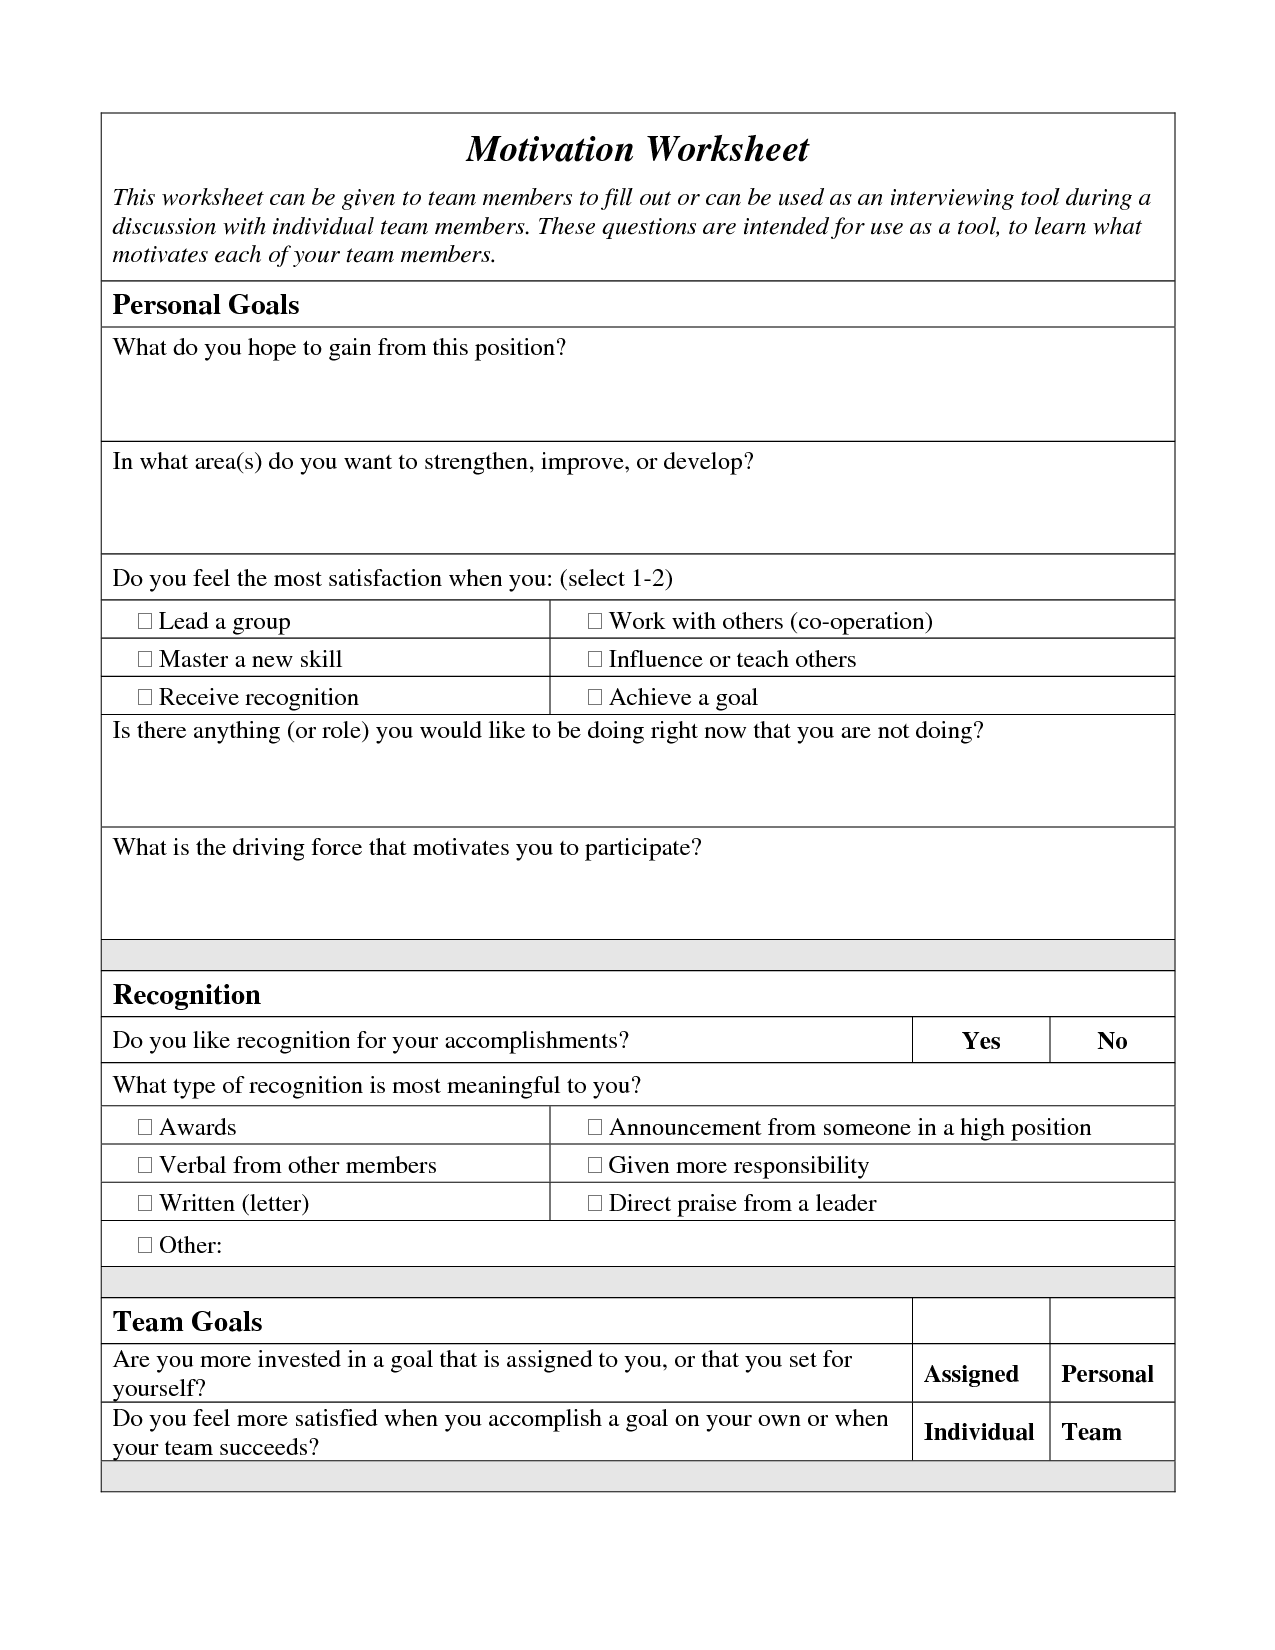 Motivational Interviewing Worksheets | Therapist Aid